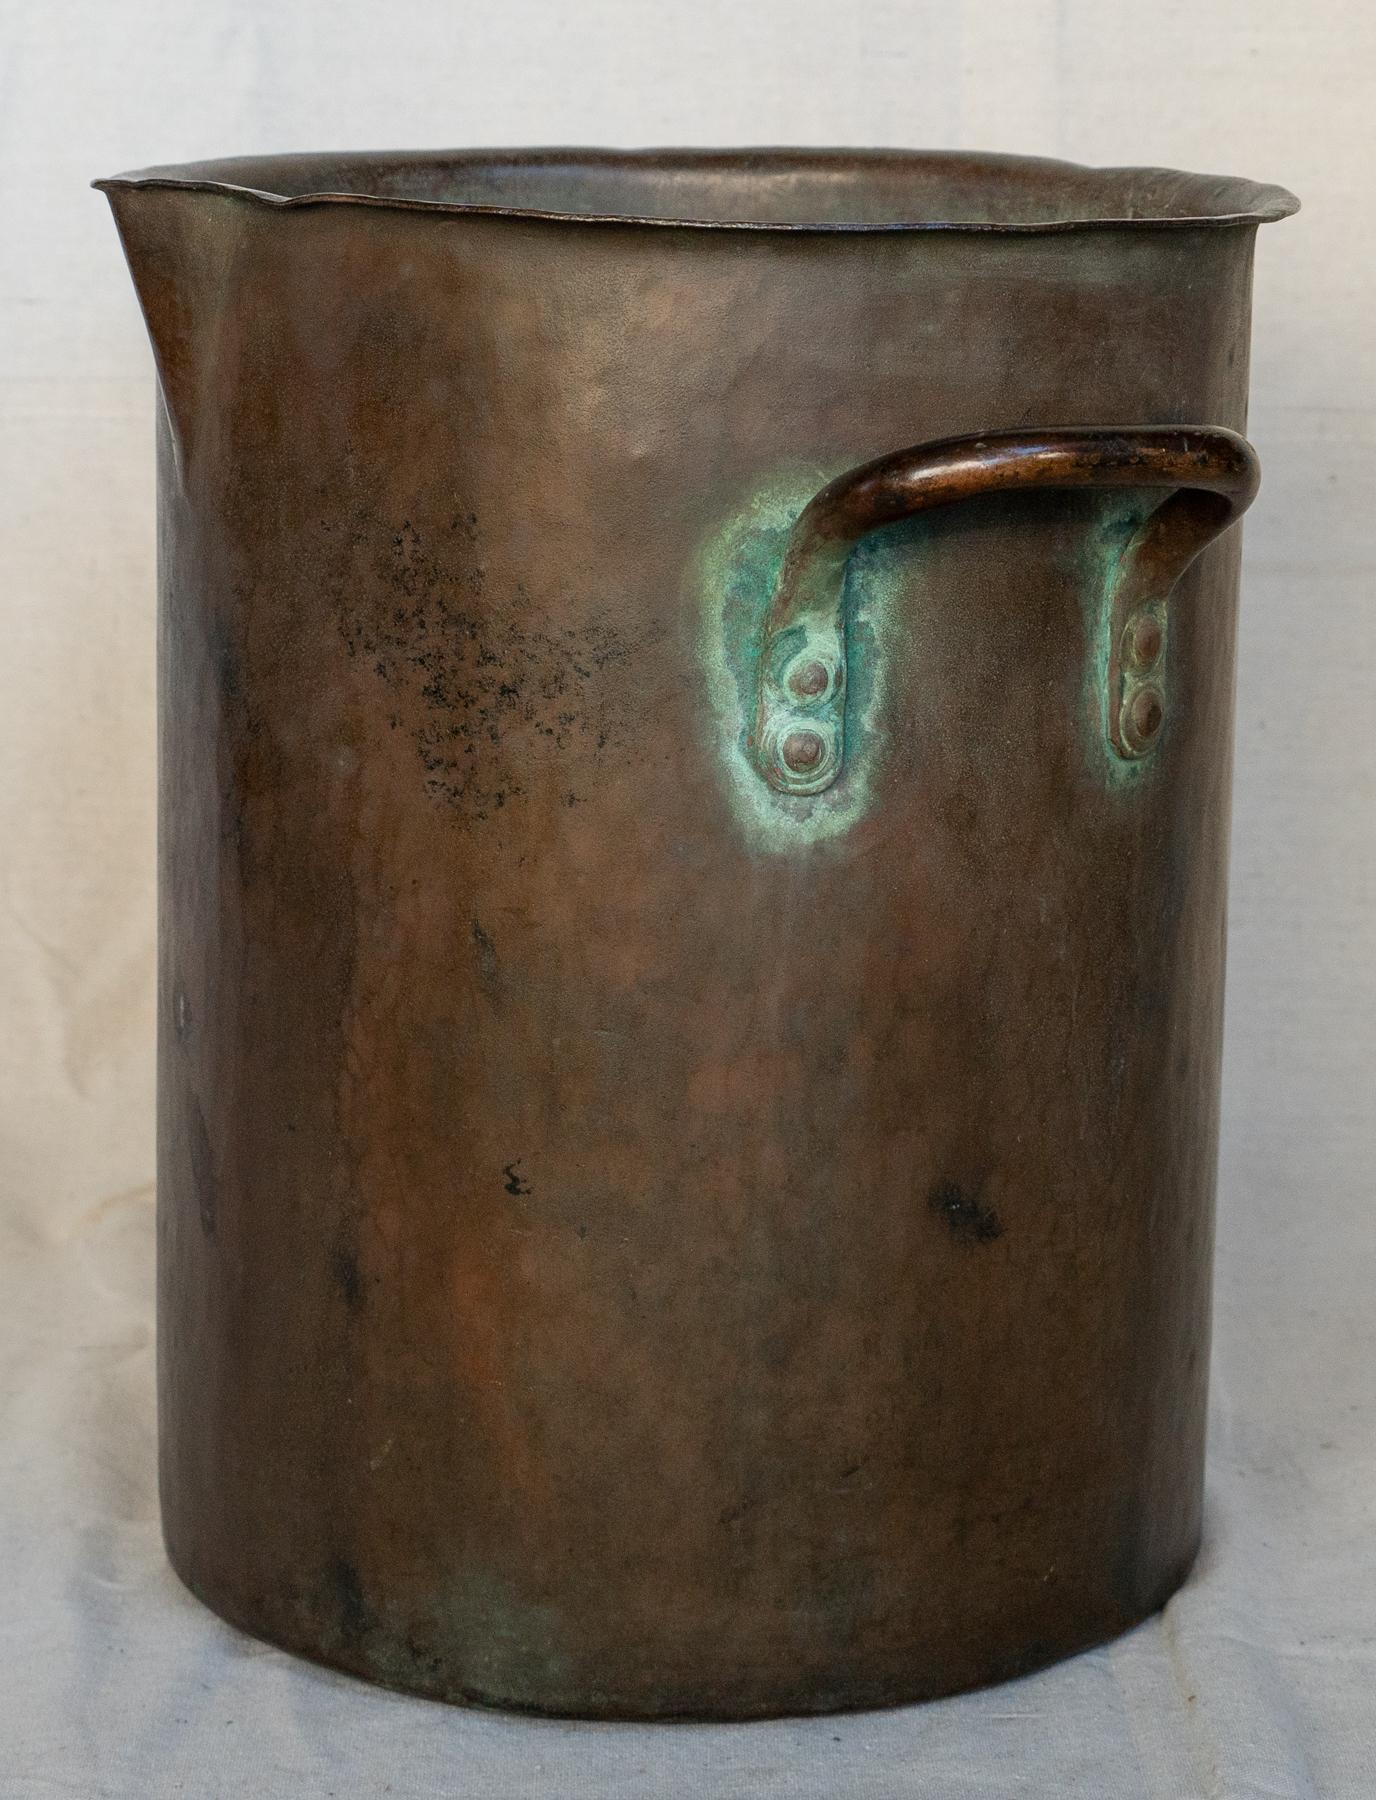 Late 19th century American heavy forged & riveted bronze / red brass pot. Circa 1880,
Hand wrought construction, not cast. Handles with large rivets. The whole pot with the surface of planishing marks with a good old unpolished surface. Very